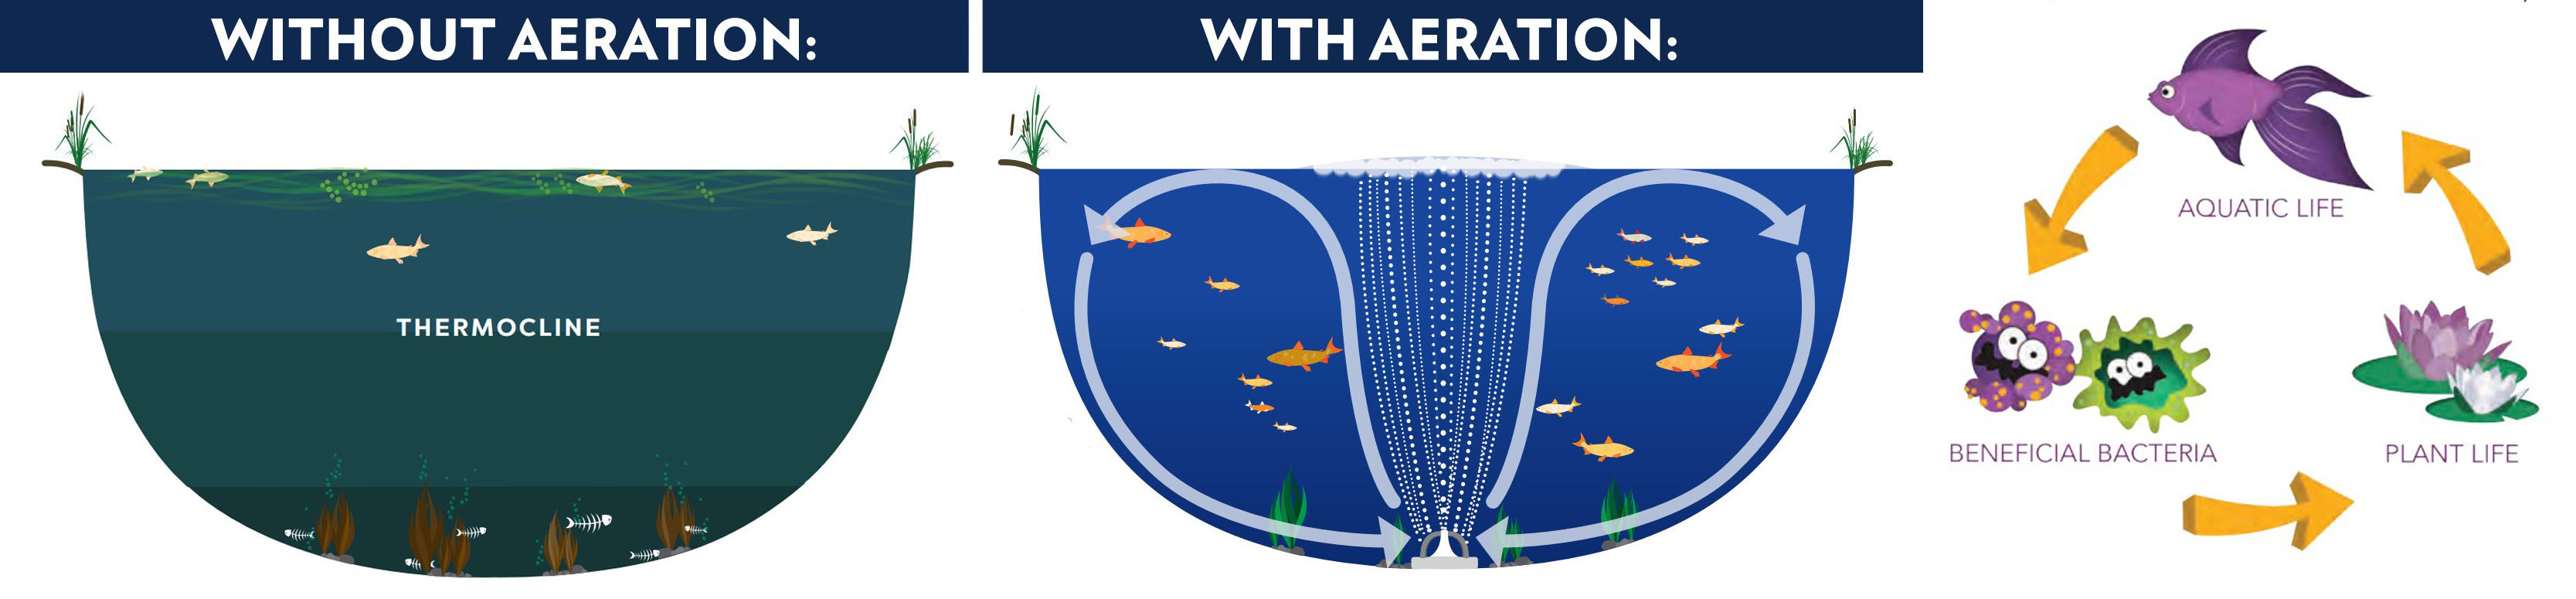 Pond aeration is crucial. Learn why!